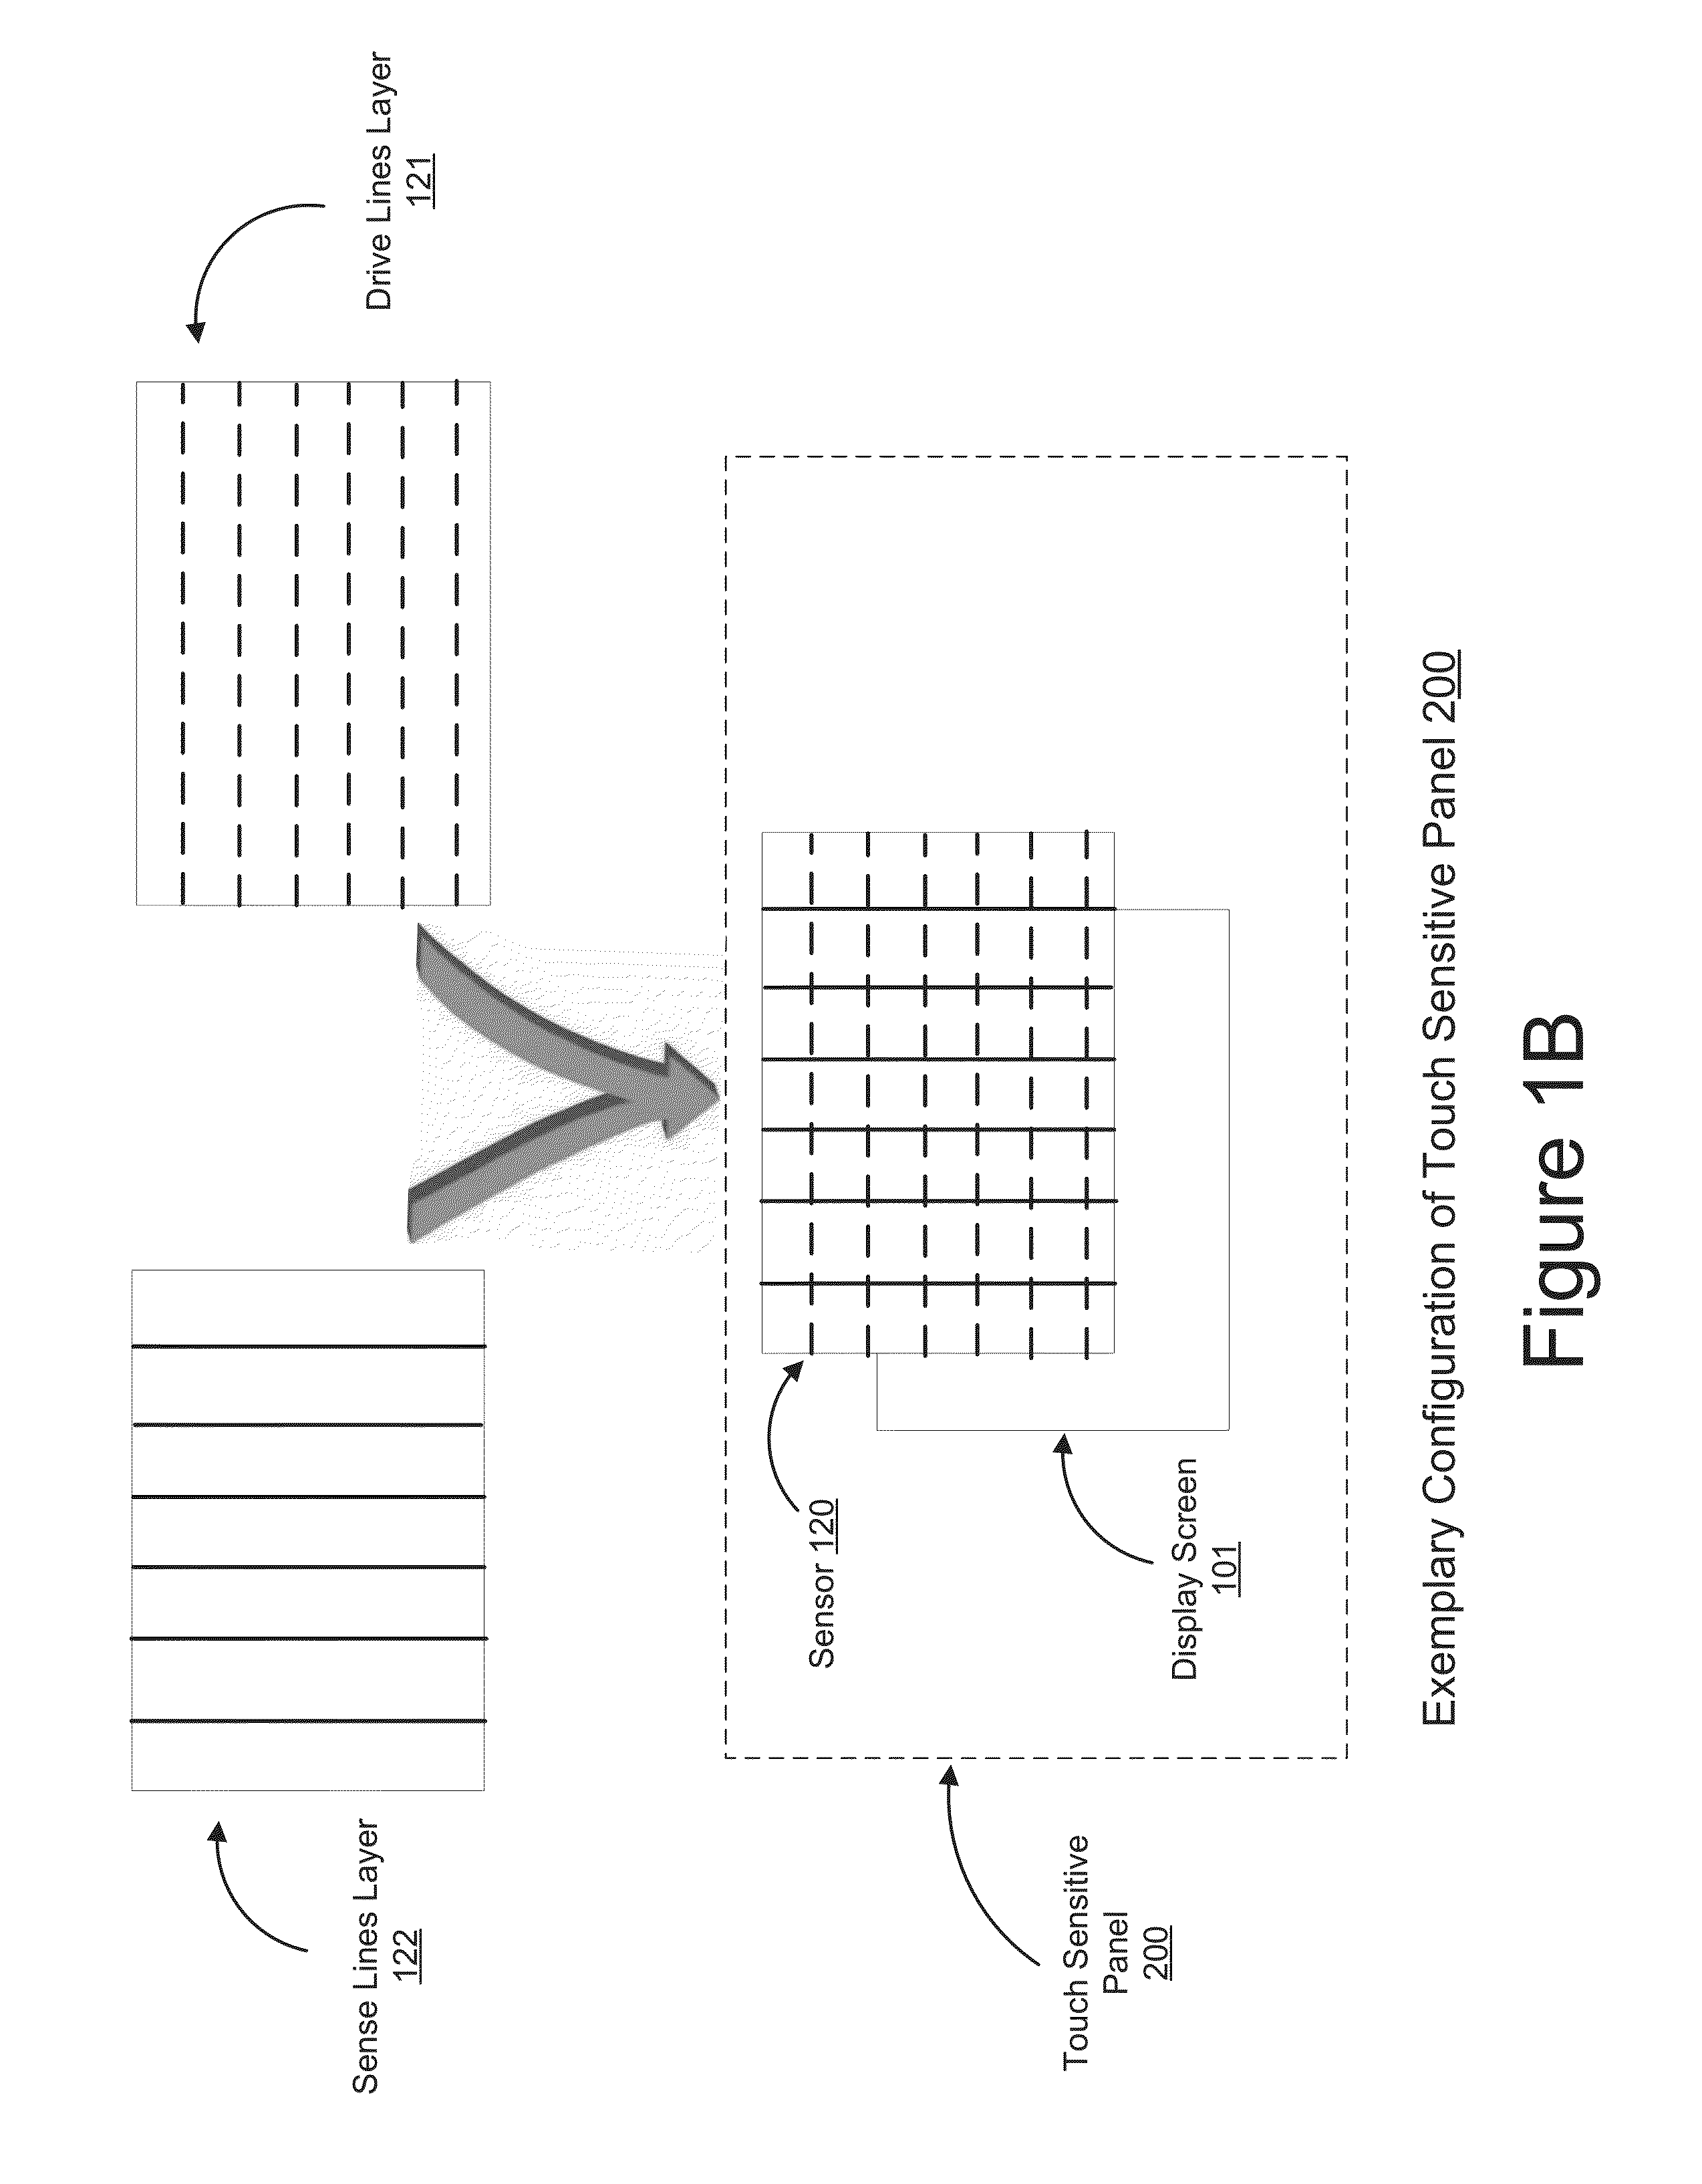 Method and system for reduced power touch input detection on an electronic device using reduced scanning